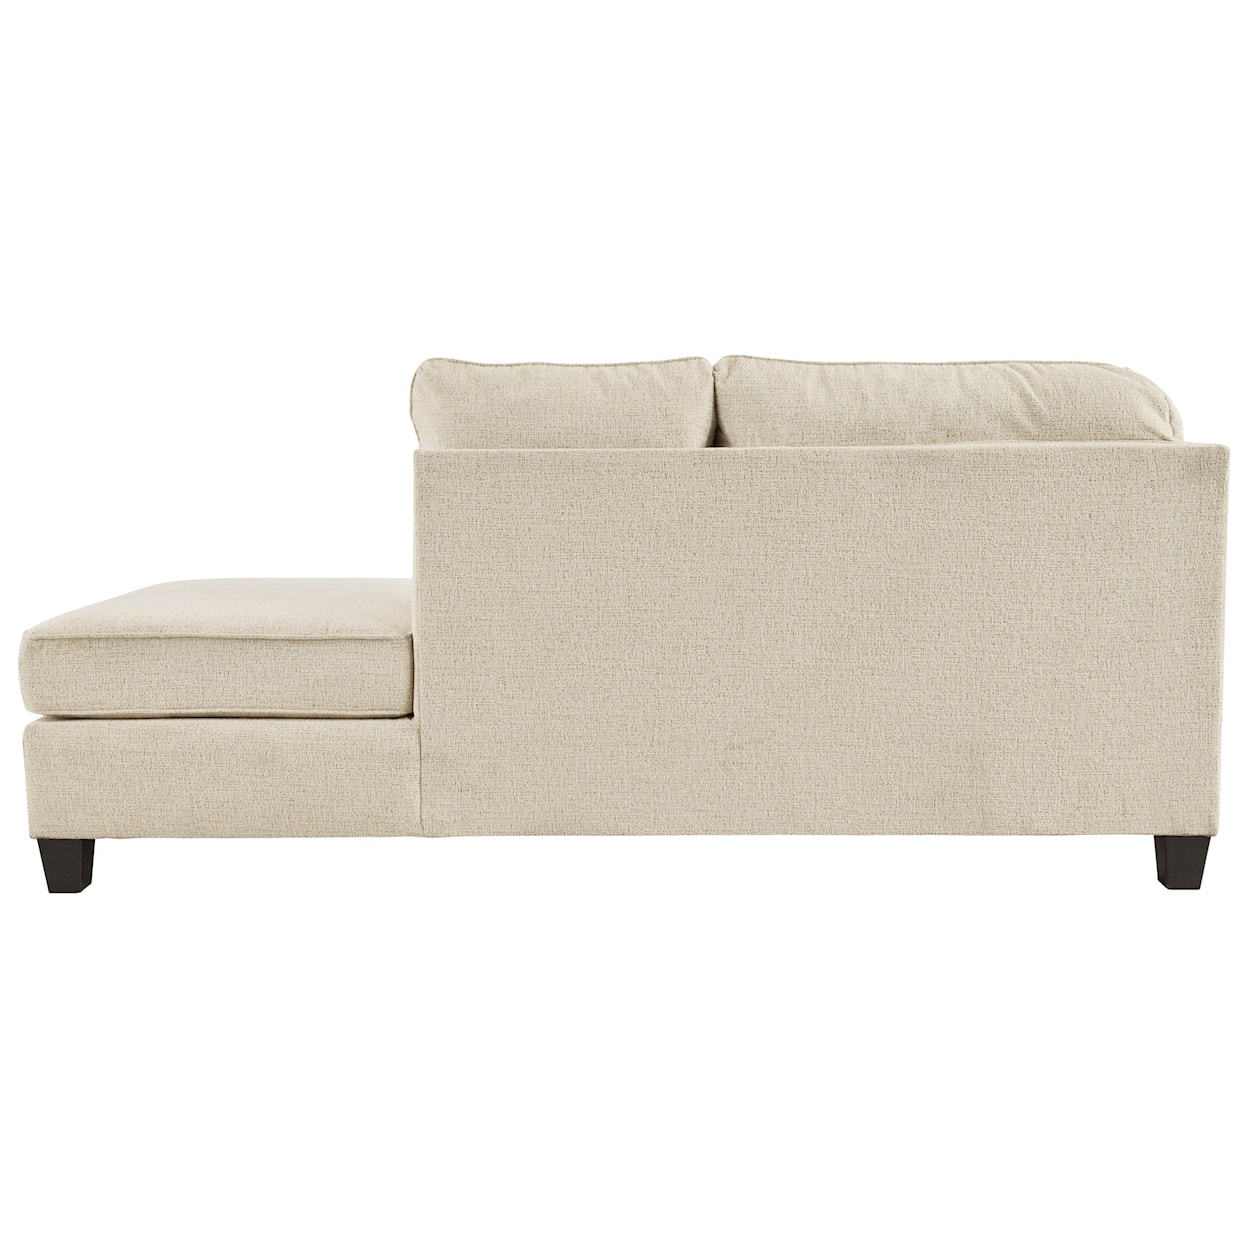 Signature Design Abinger 2-Piece Sectional w/ Chaise and Sleeper